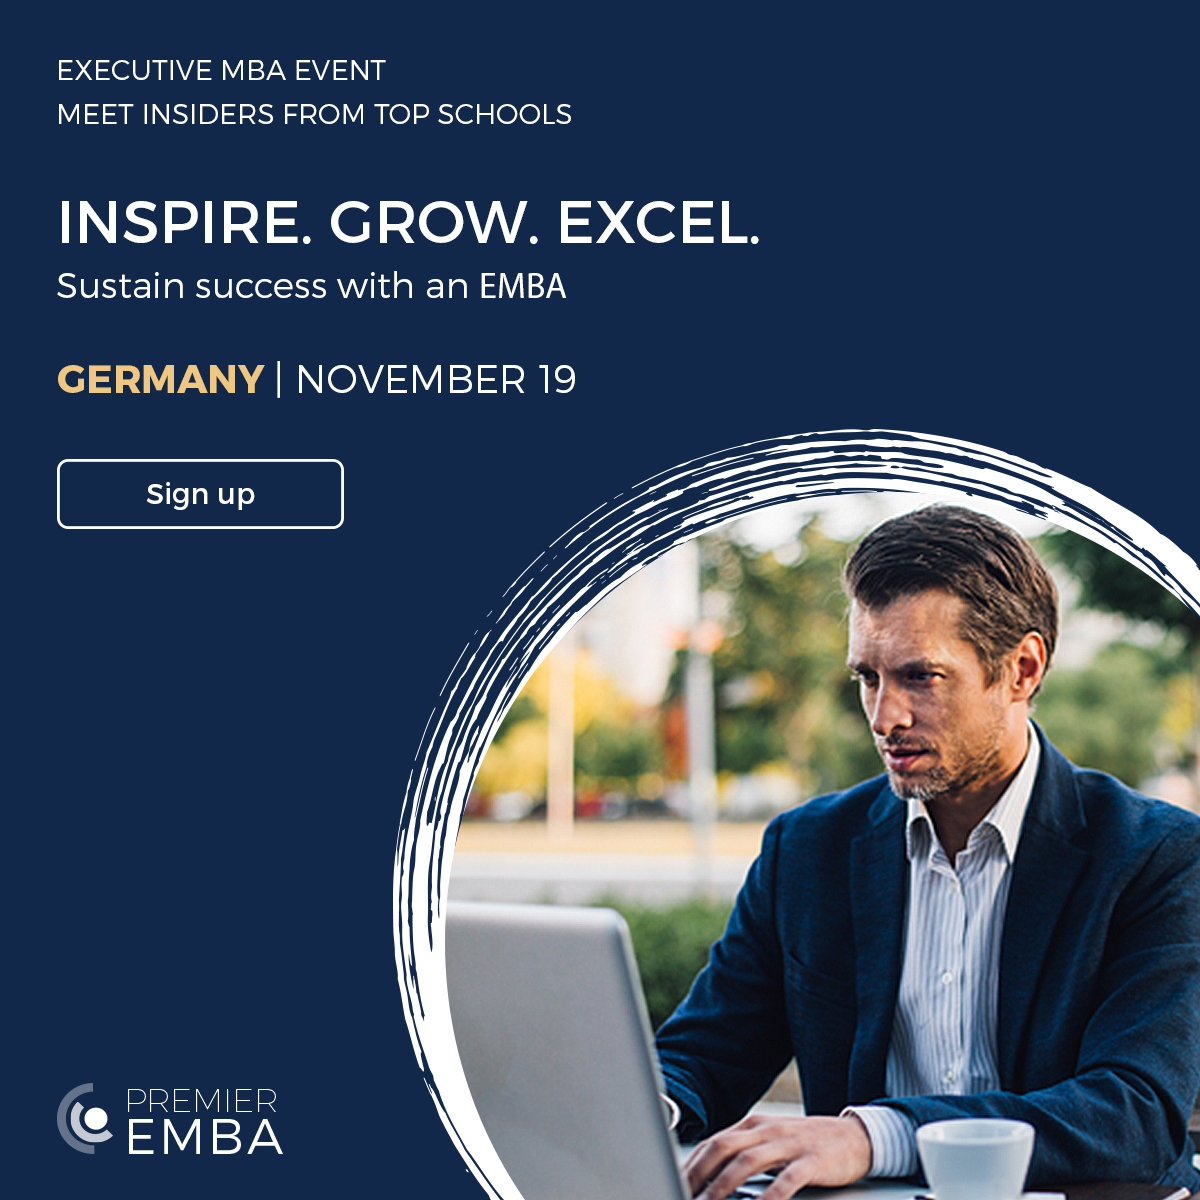 Premier Emba Take The Next Step In Your Career With This Online Event